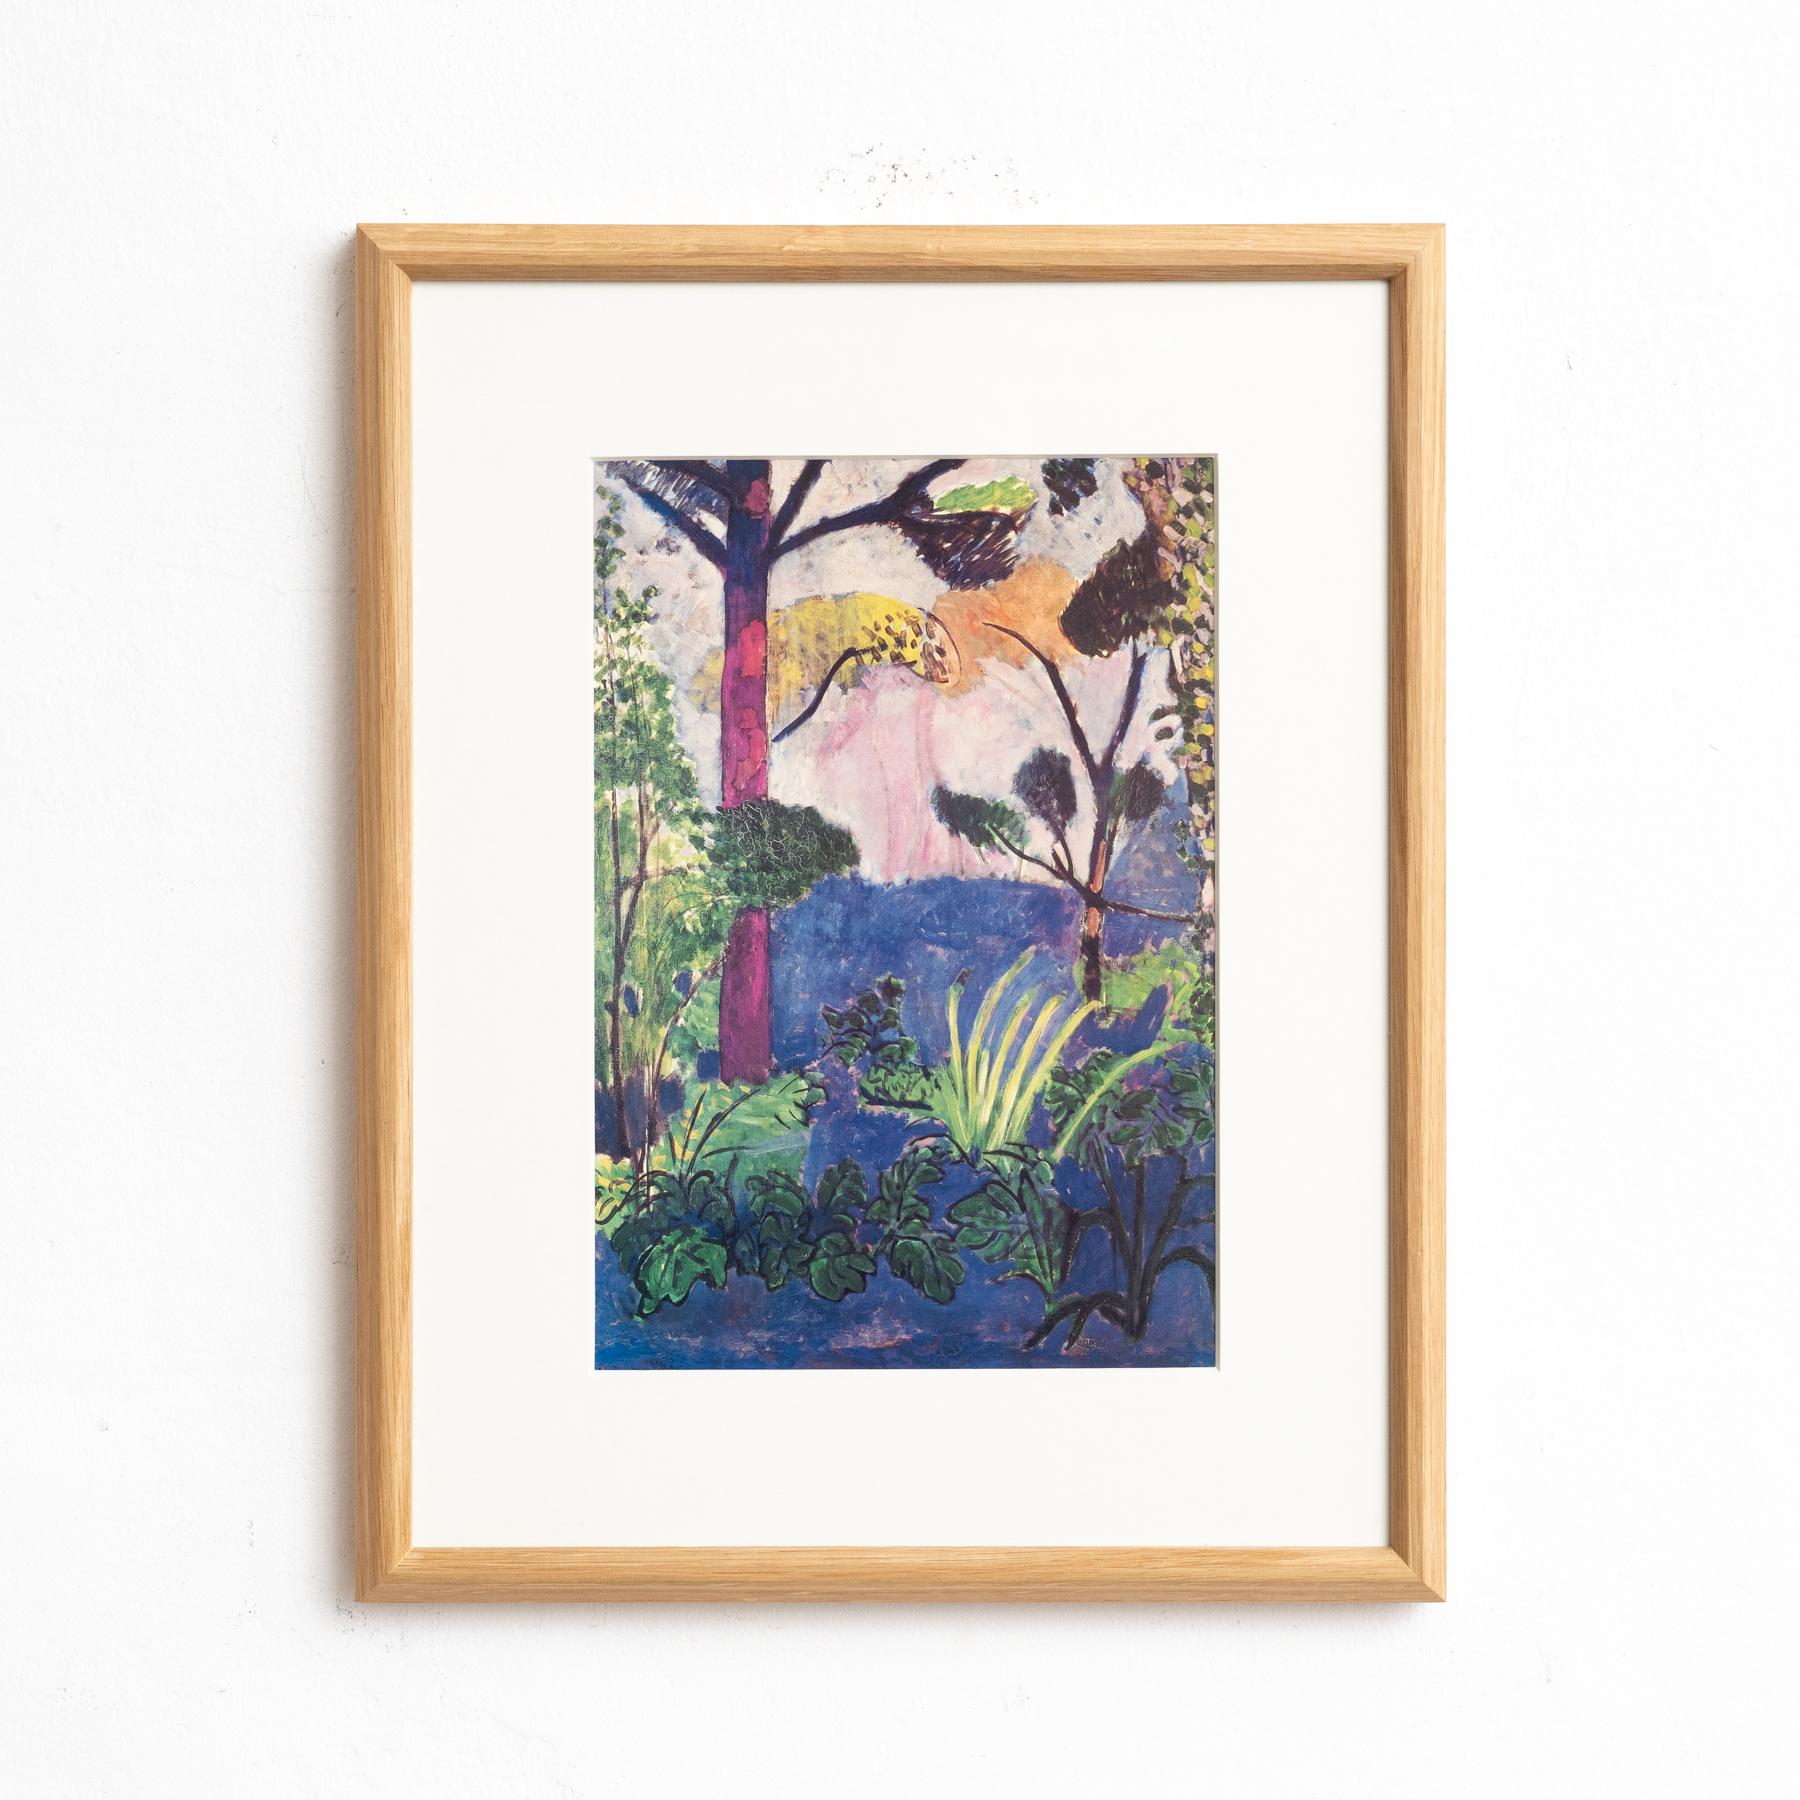 Matisse Framed Colorful Print by Moderna Museet, circa 1990 

With a high quality wood frame

In original condition, with minor wear consistent of age and use, preserving a beautiful patina.